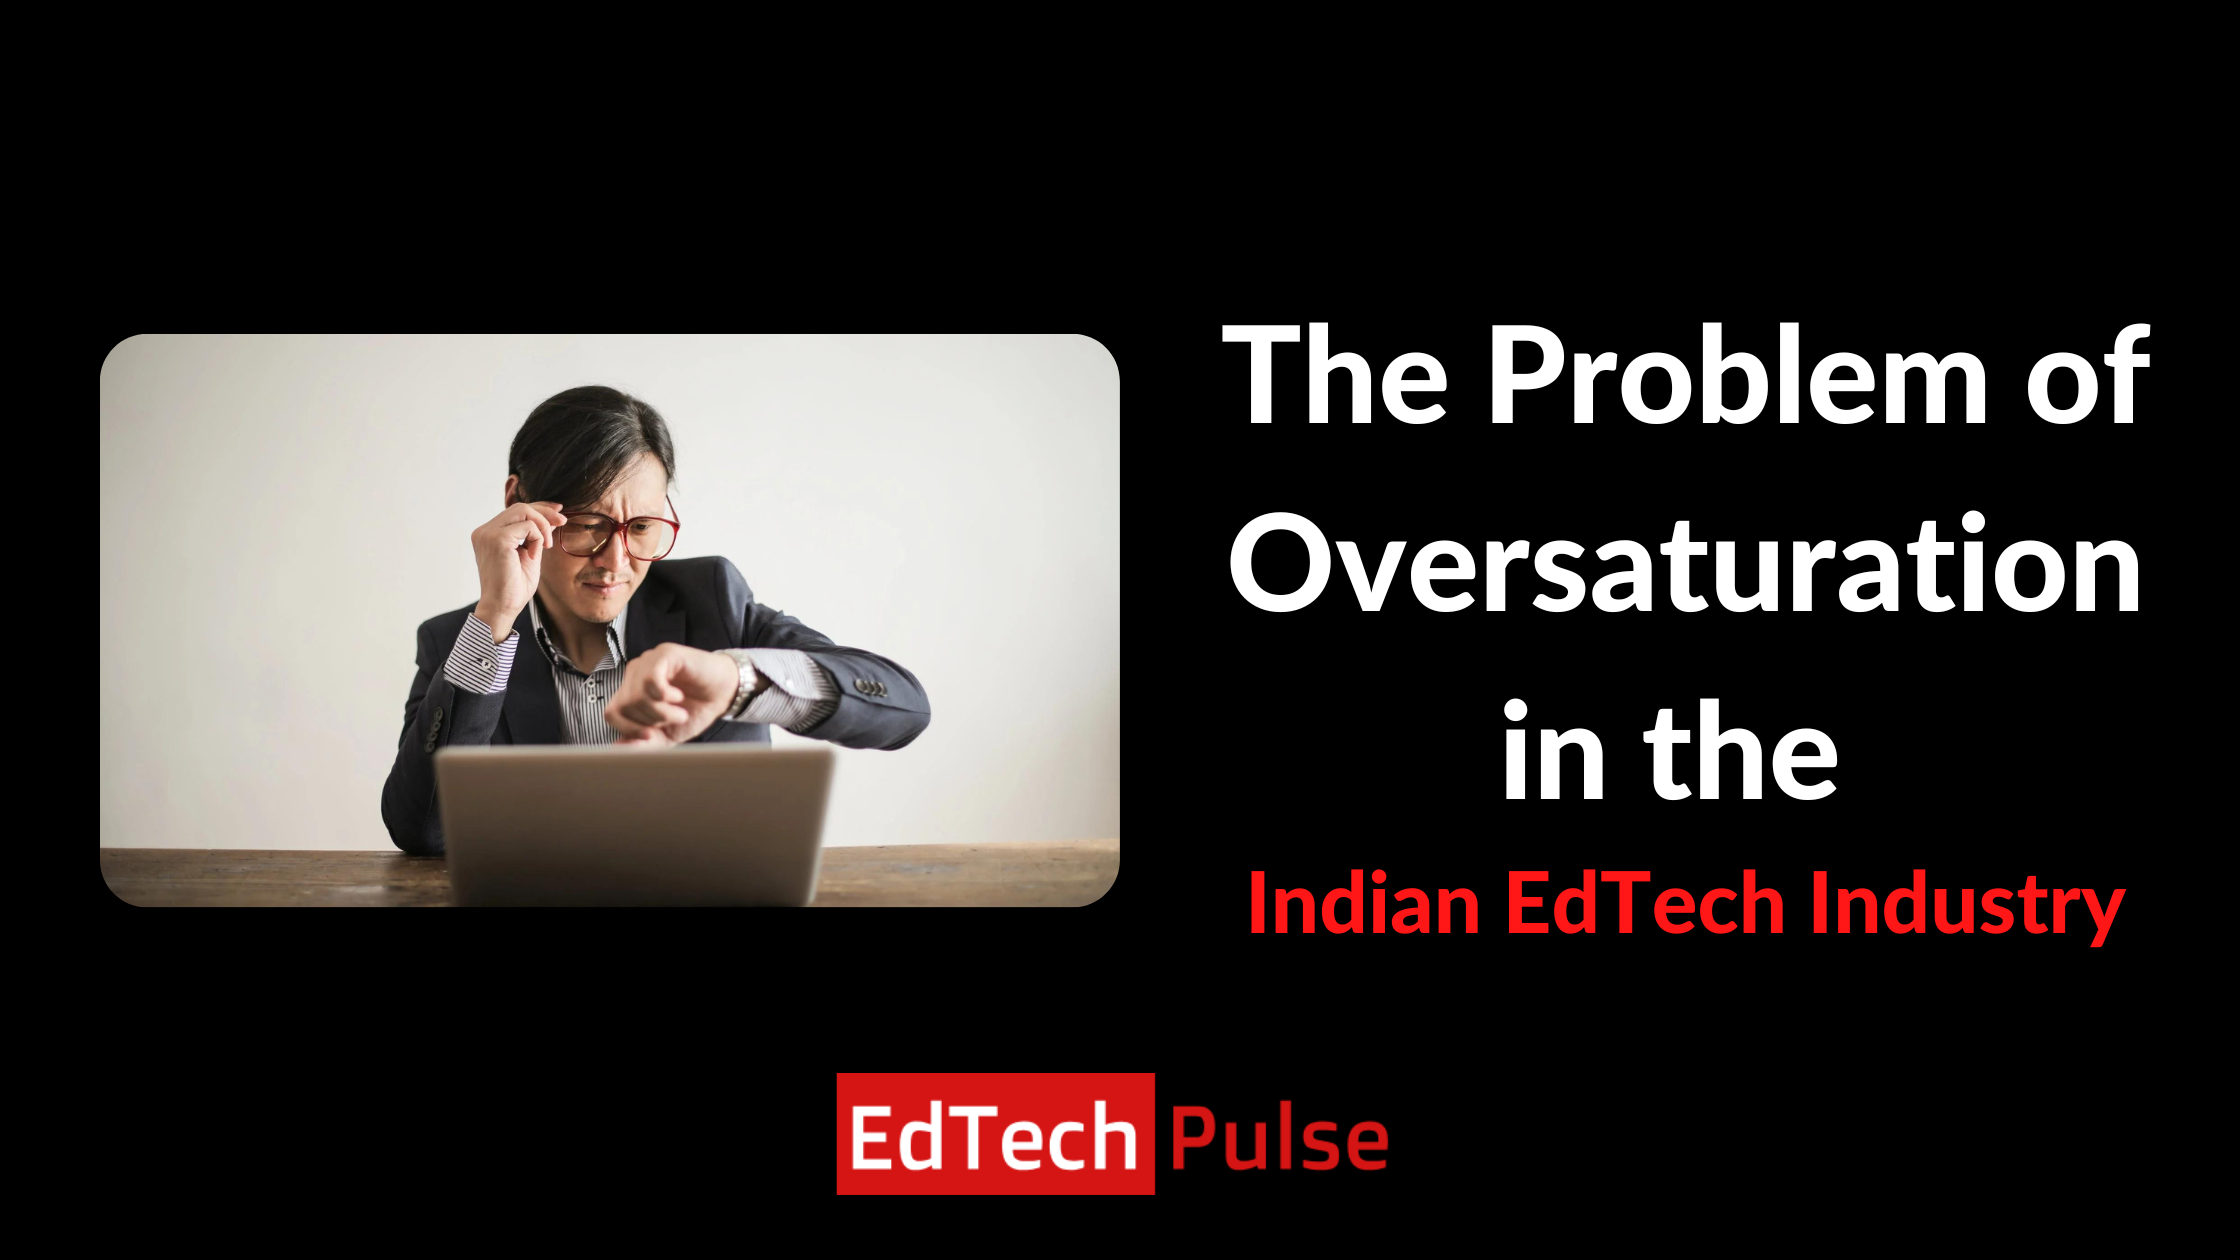 The Problem of Oversaturation in the Indian EdTech Industry